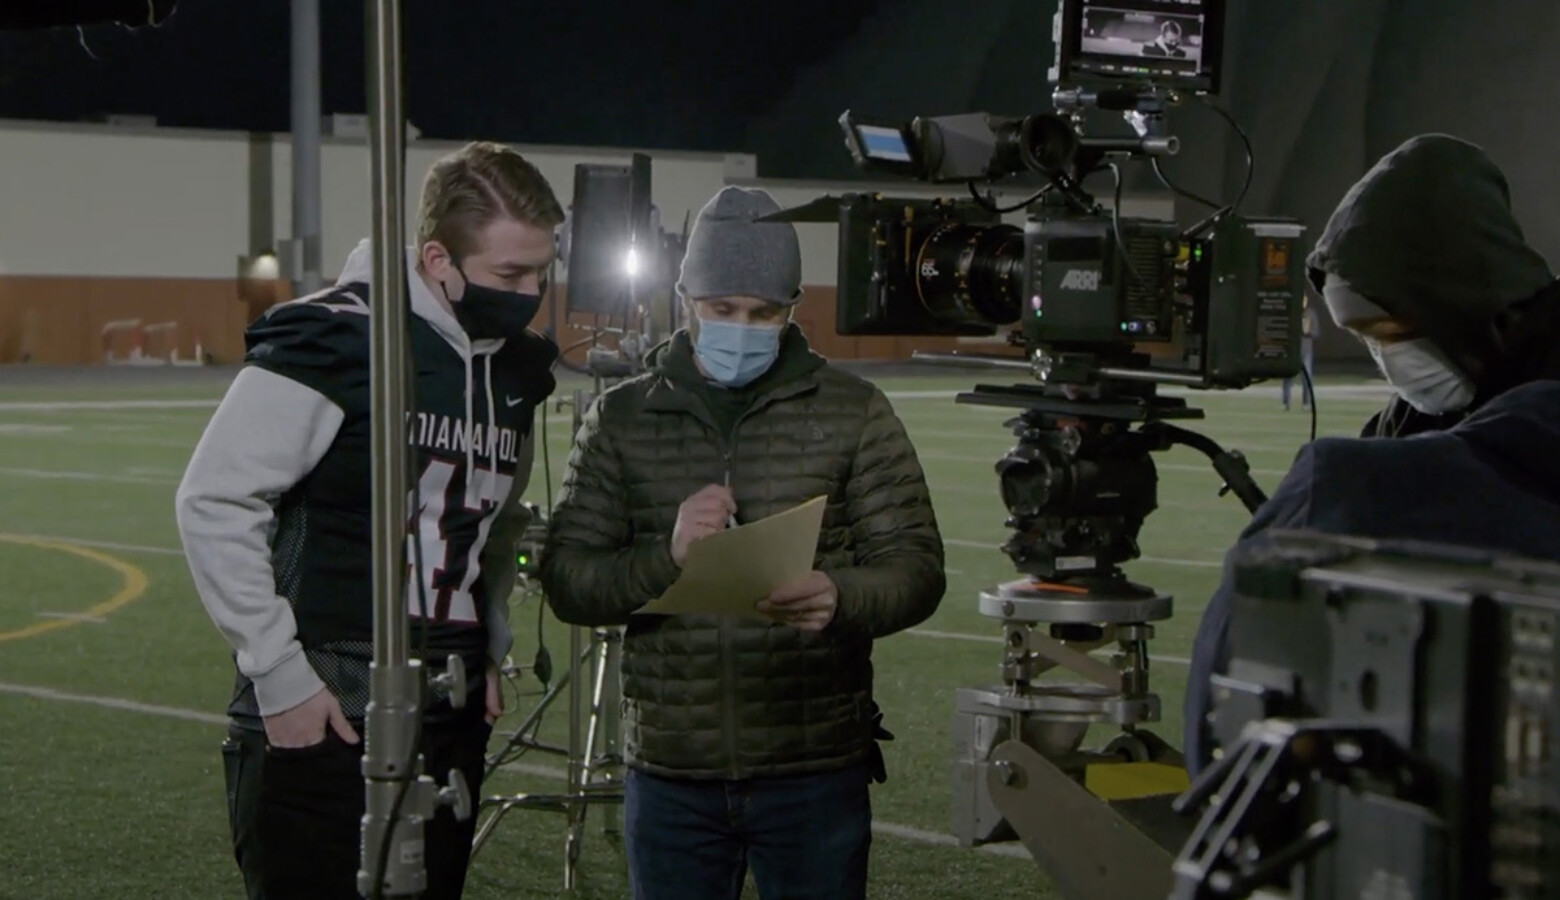 The Indiana Department of Health's Super Bowl commercial will feature Wes Loggan, the son of an Indianapolis high school athletic director who died from COVID-19 last year. (Courtesy of IDOH)